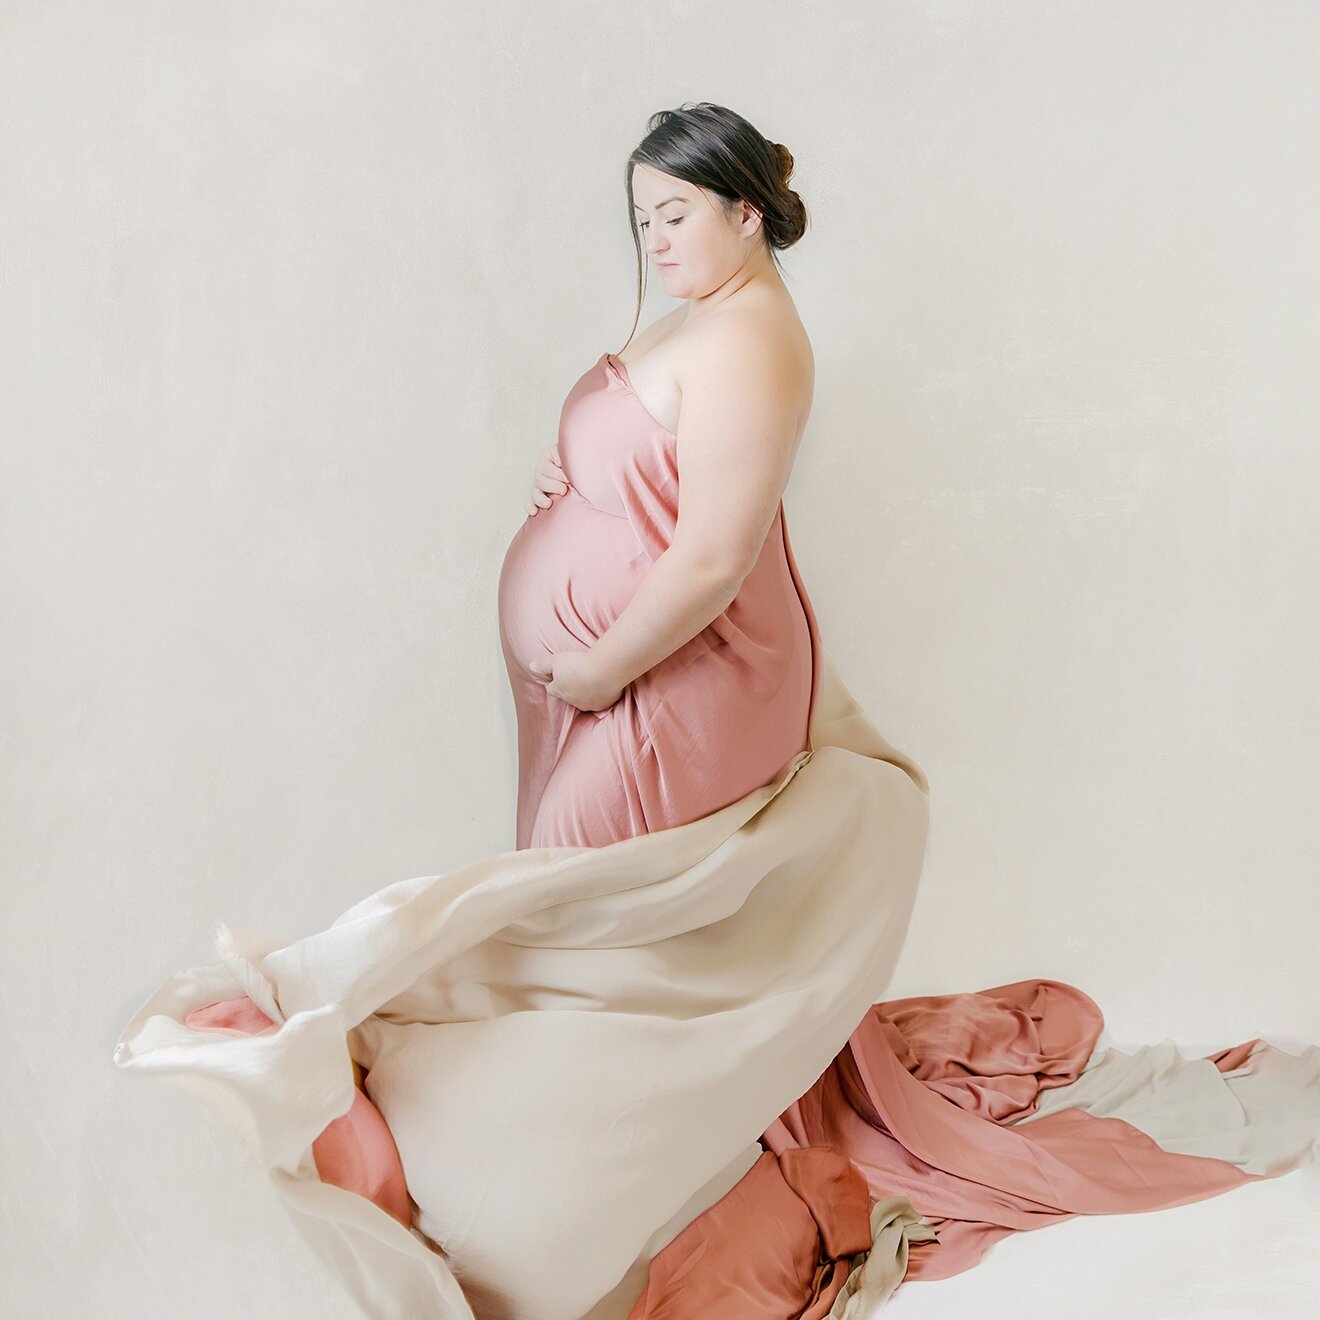 Documenting your pregnancy with beautiful portraits is a perfect way to elegantly remember this unique and special time in your life.⁠
.⁠
.⁠
.⁠
.⁠
.⁠
.⁠
.⁠
.⁠
.⁠
.⁠
#maternity #pregnancyphotos #maternitysession #pregnancy #pregnant #ncphotographer #n